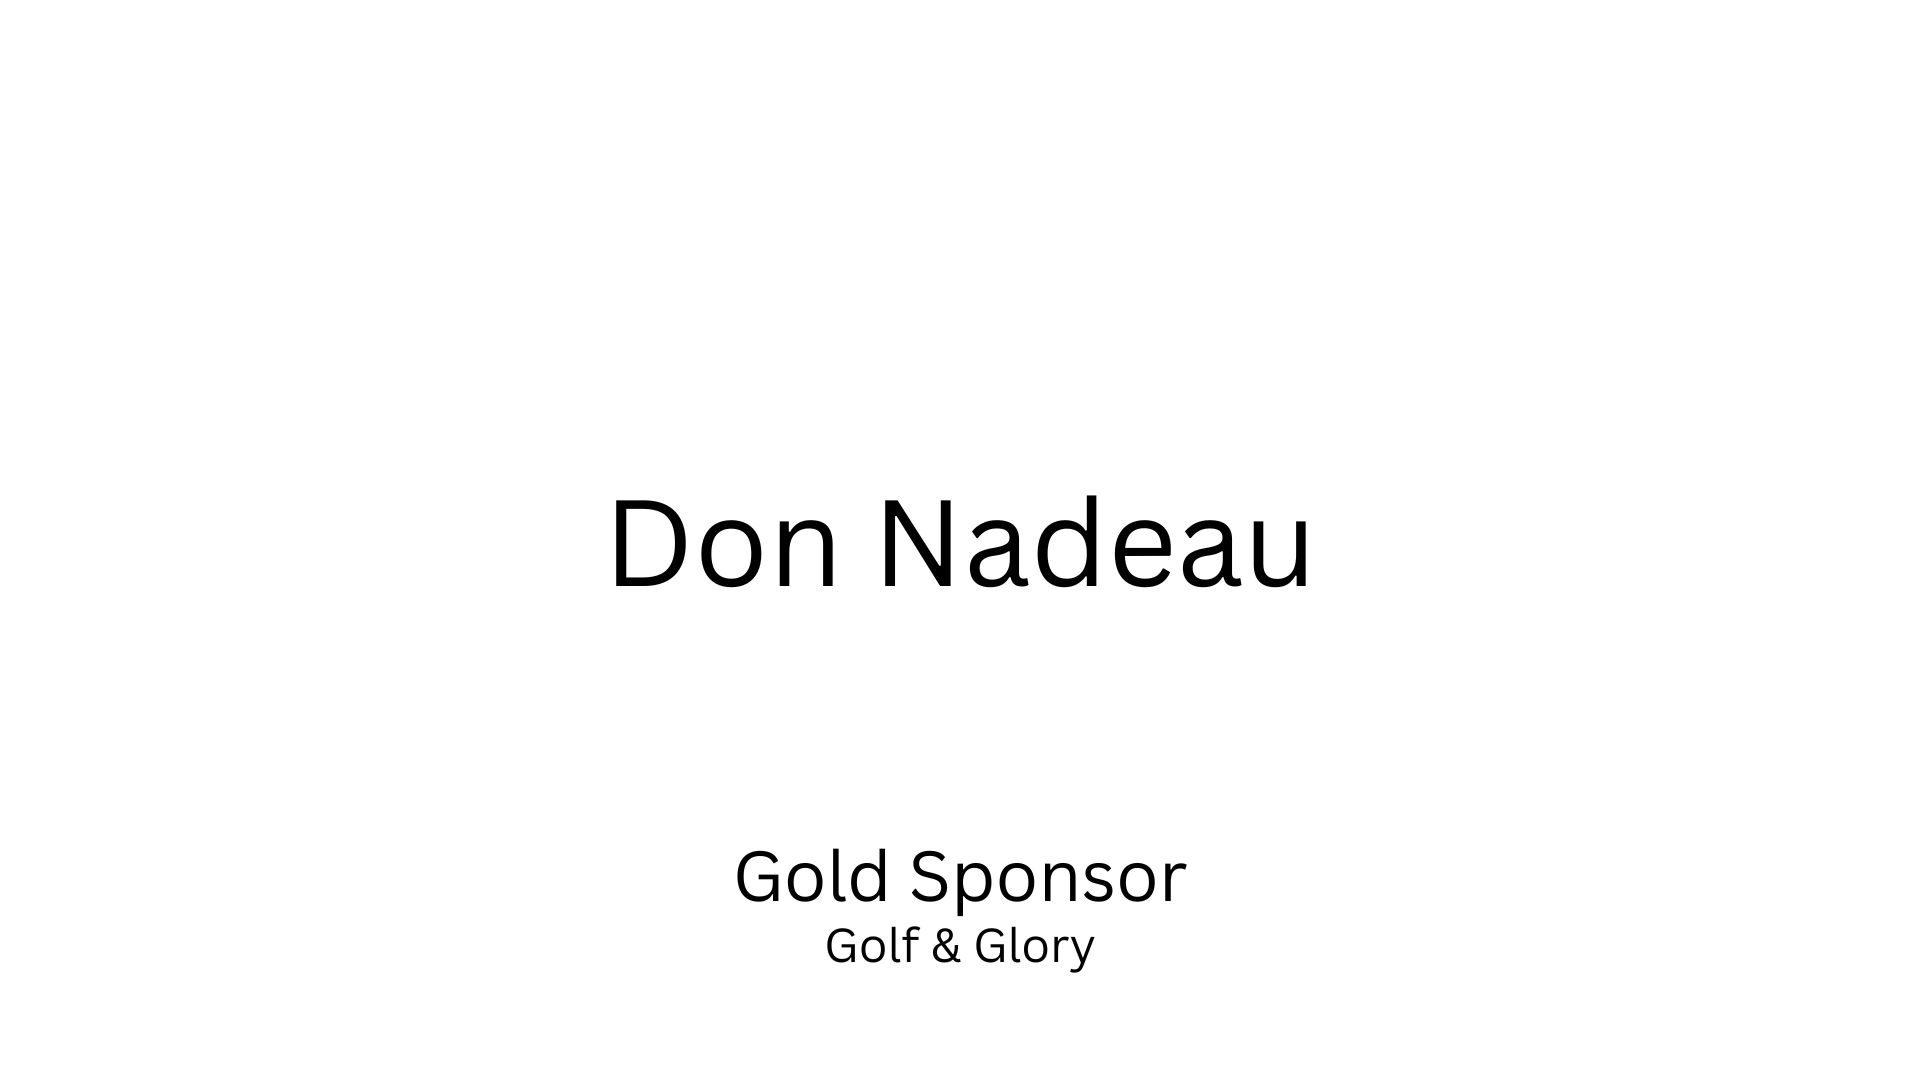 Don Nadeau, Gold Sponsor for the 2022 Golf and Glory Outing